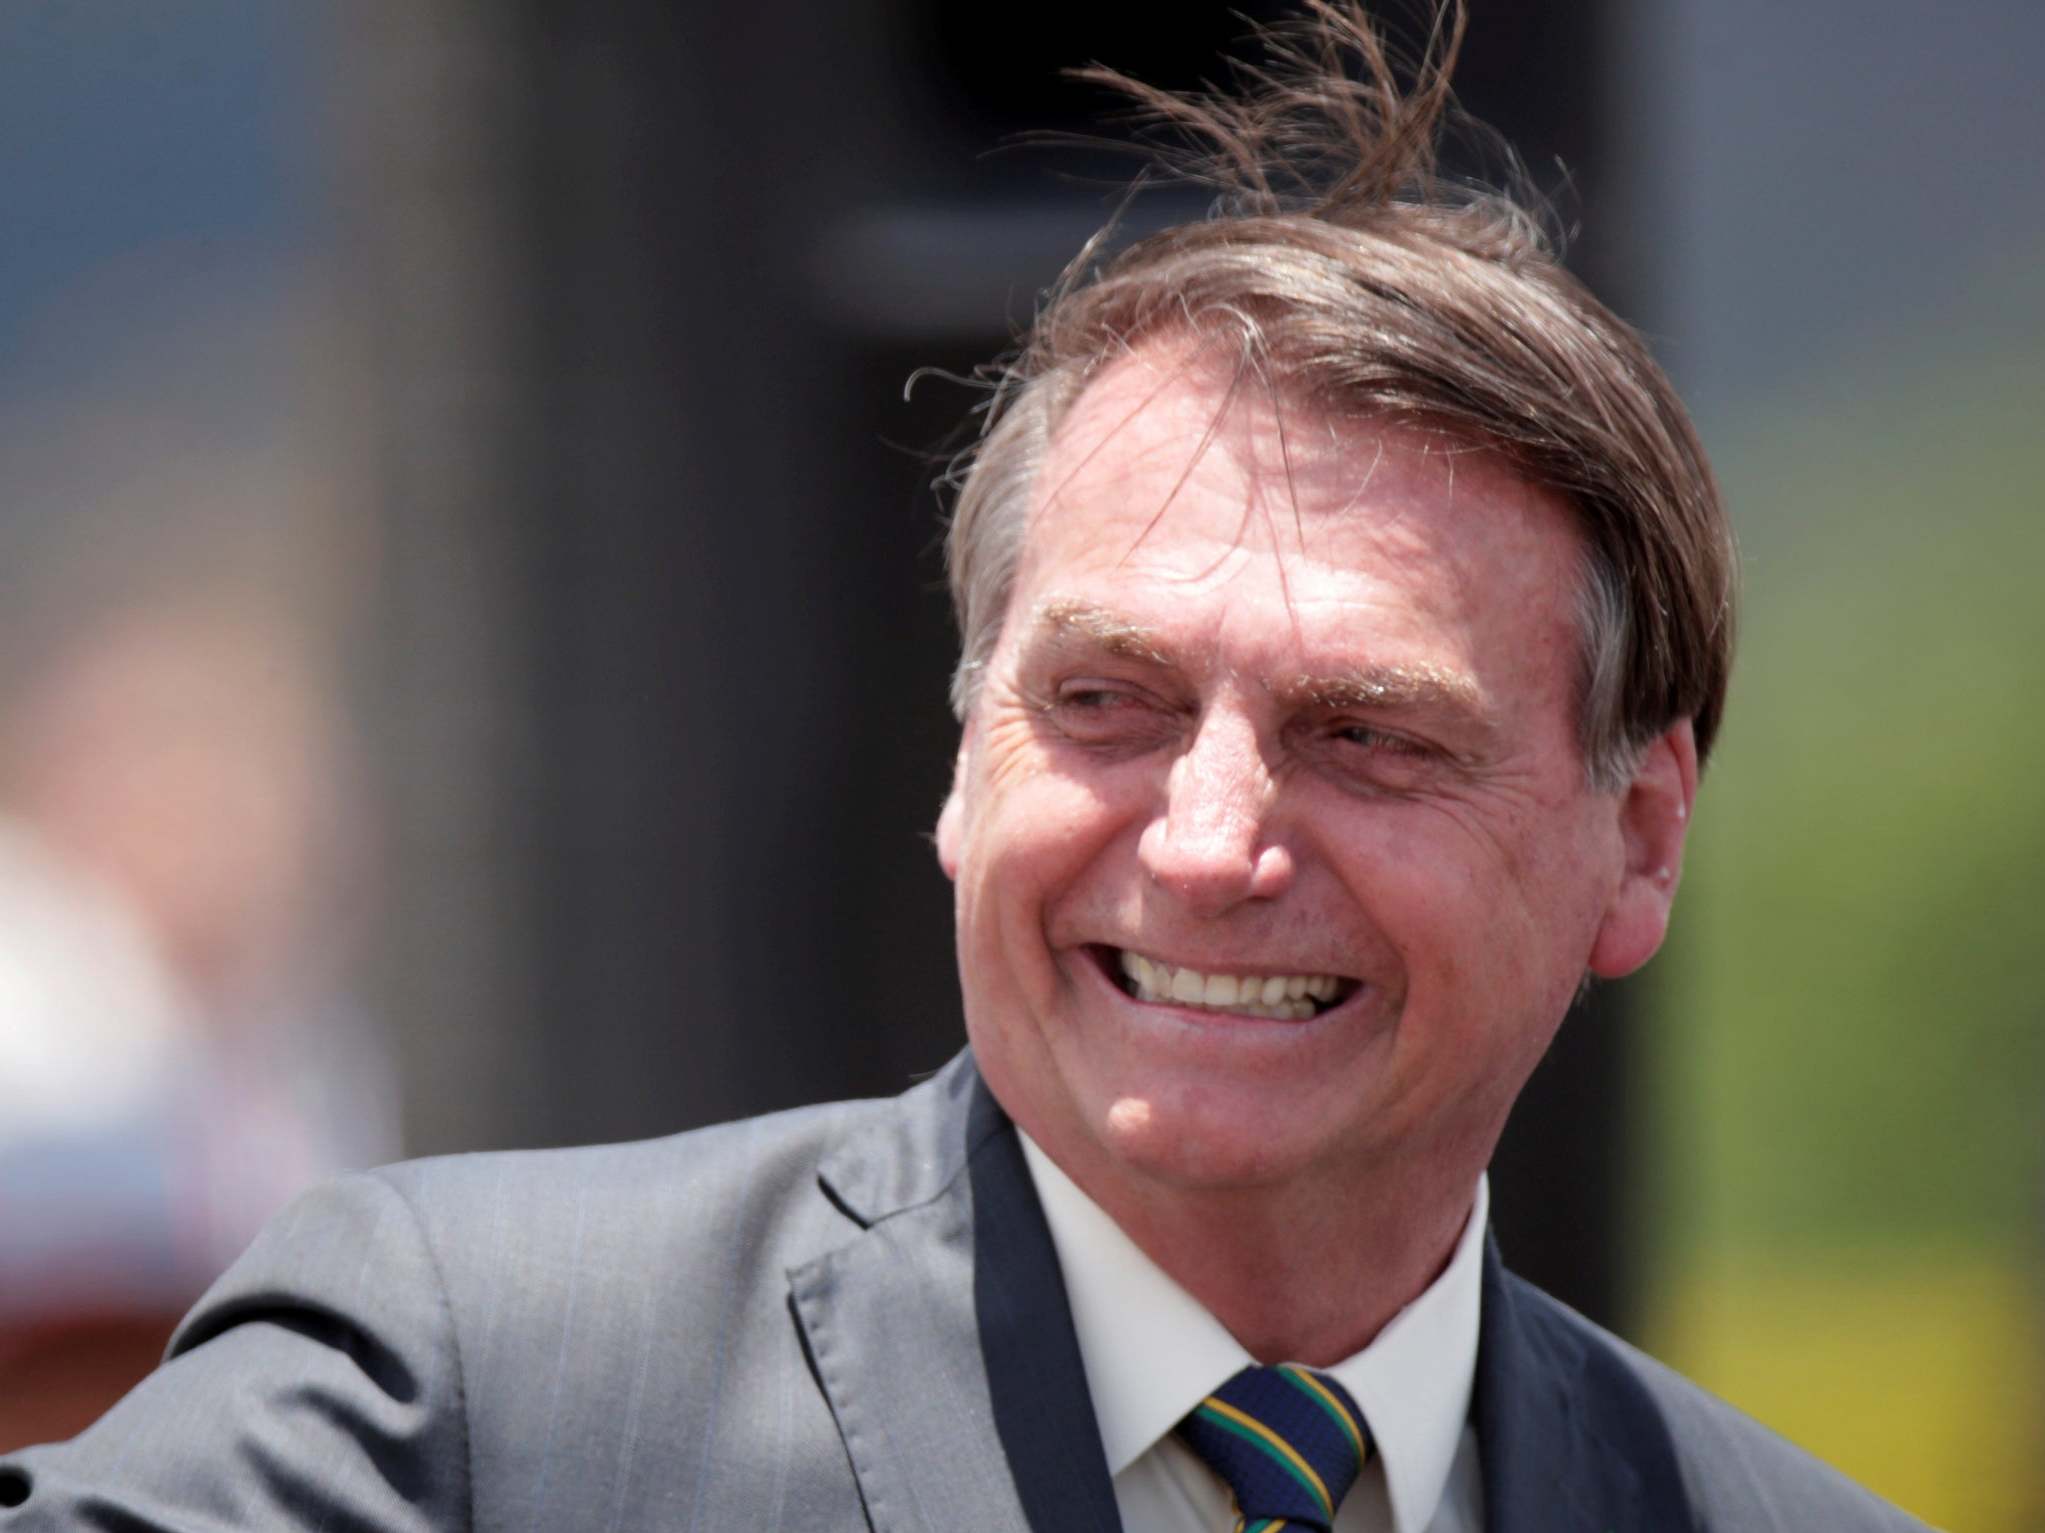 Jair Bolsonaro's new party's statute includes a commitment to defend life from the moment of conception and the right to carry firearms to protect private property